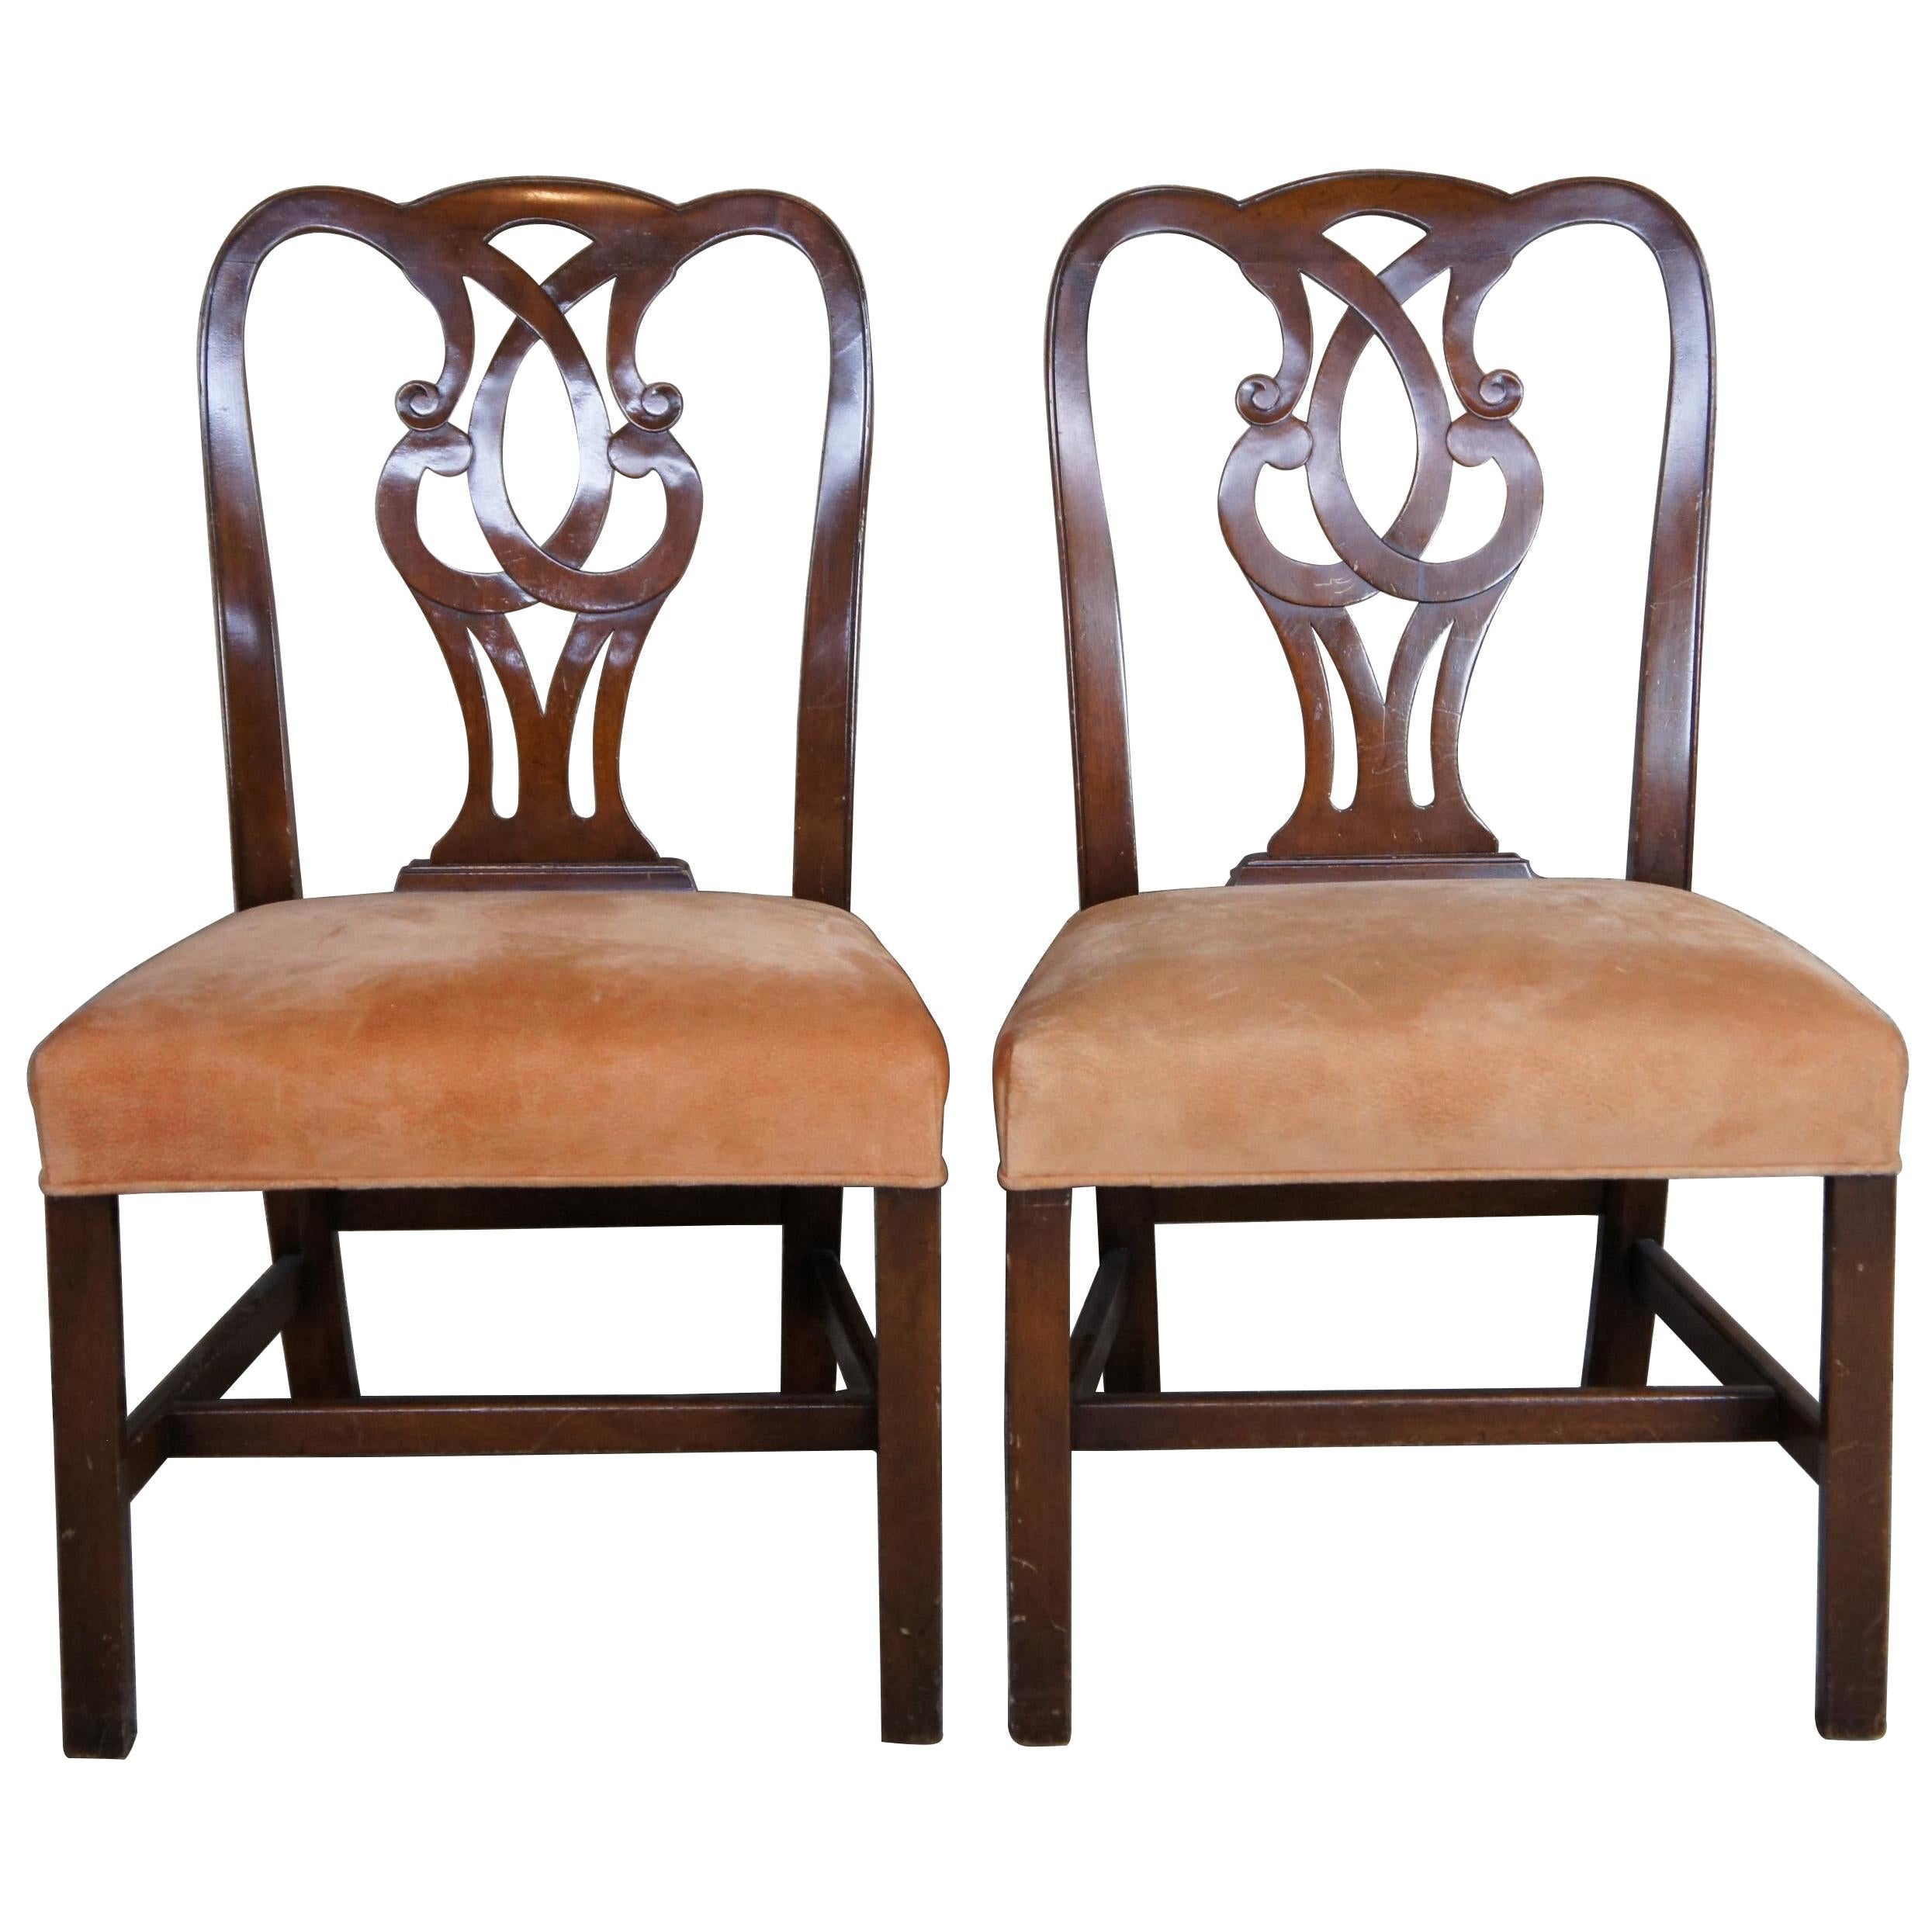 2 Antique Mahogany Chippendale Style Pretzel Back Side Chairs